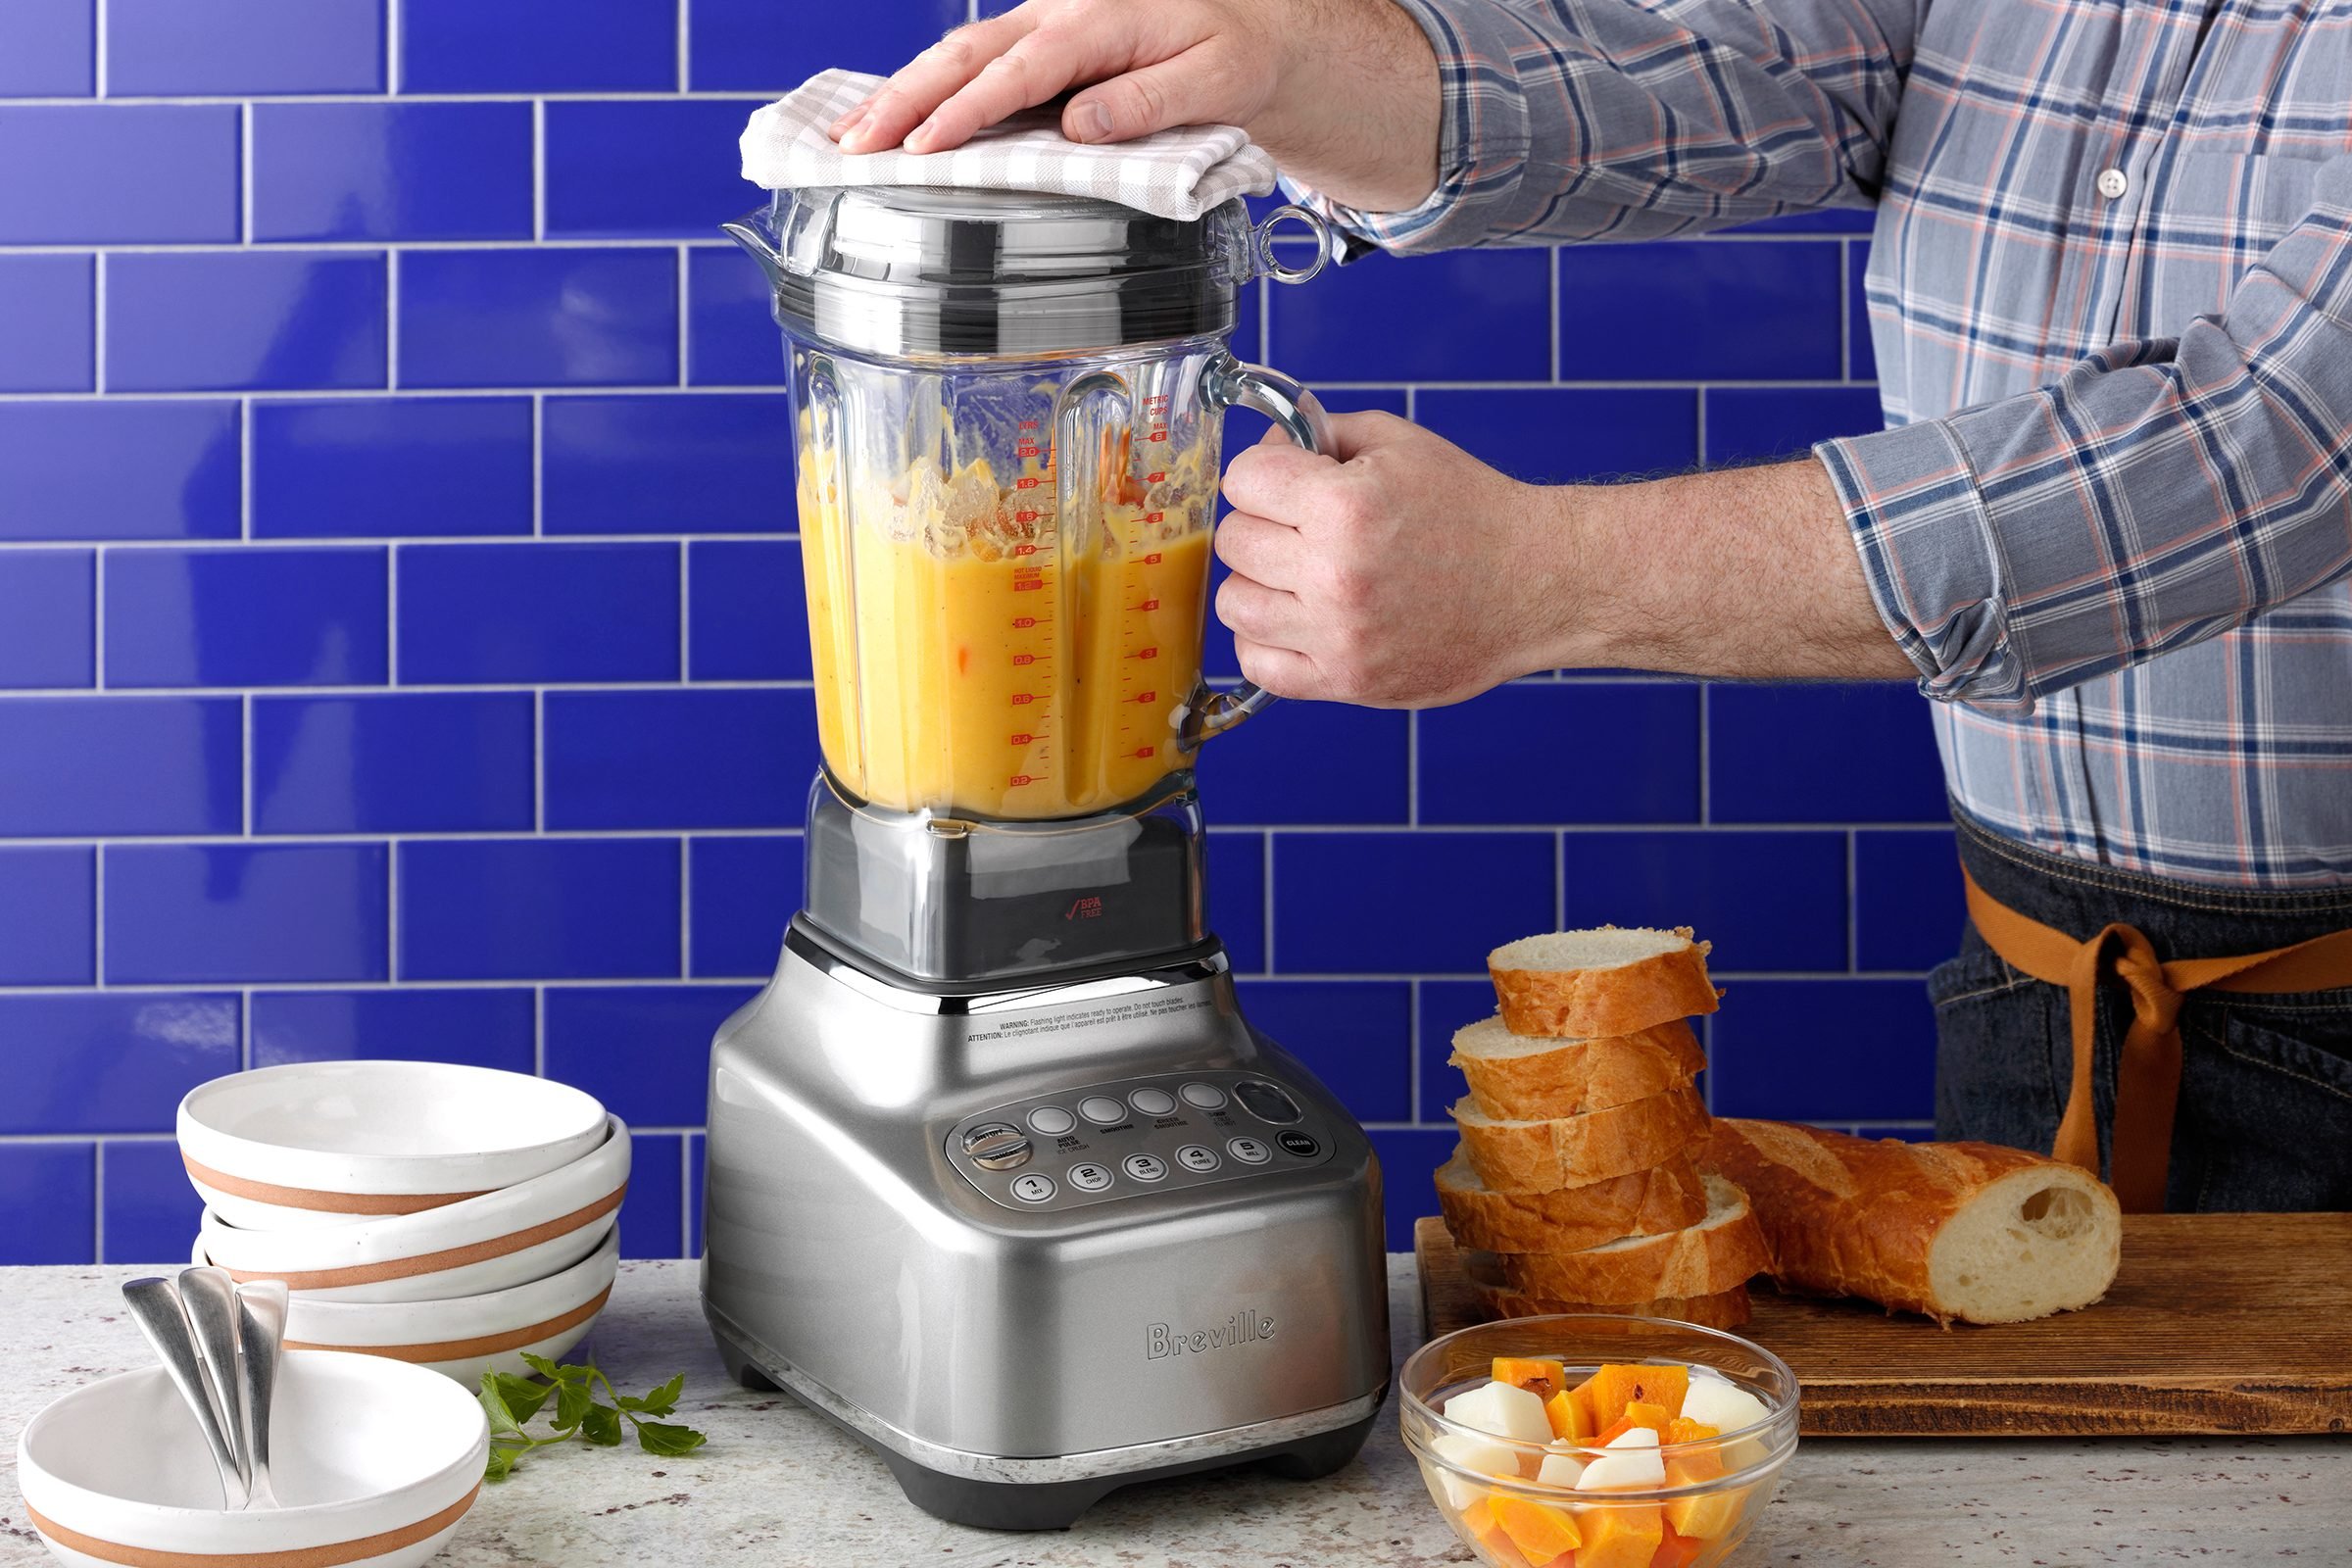 Foods one should avoid putting in the blender